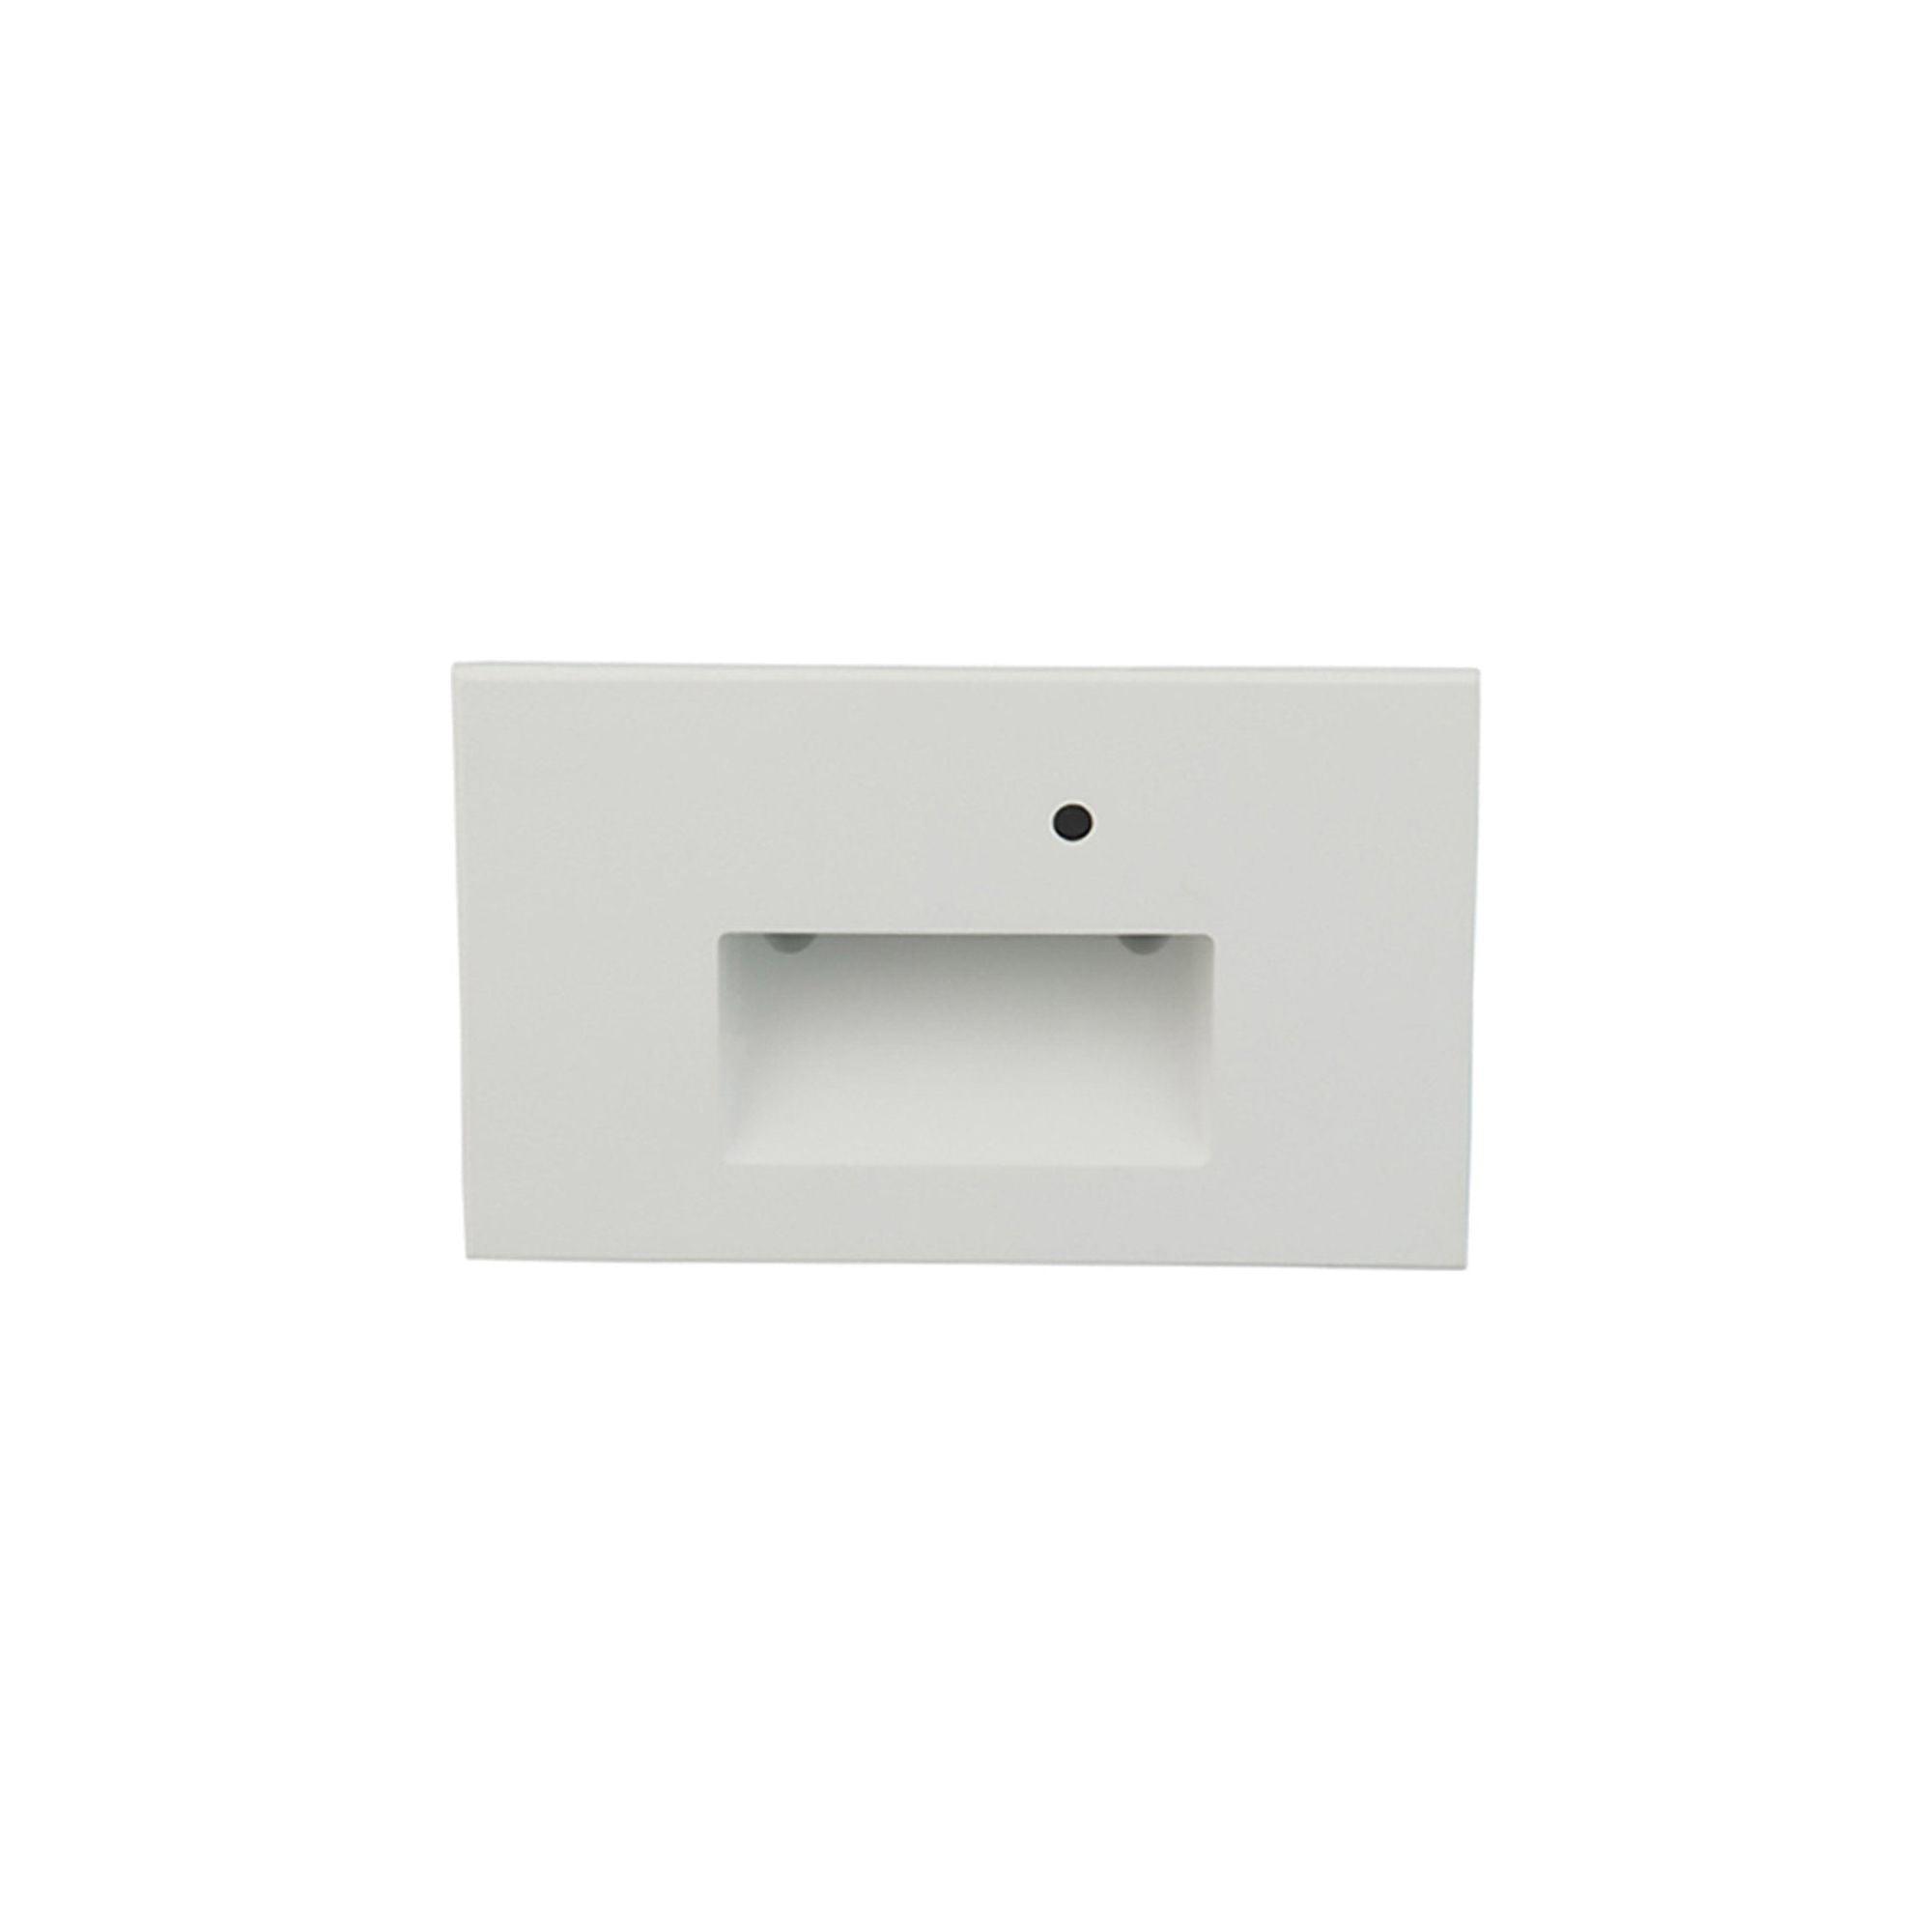 WAC Lighting - LEDme 120V LED Horizontal Indoor/Outdoor Step and Wall Light with Daylight Photocell Sensor - Lights Canada